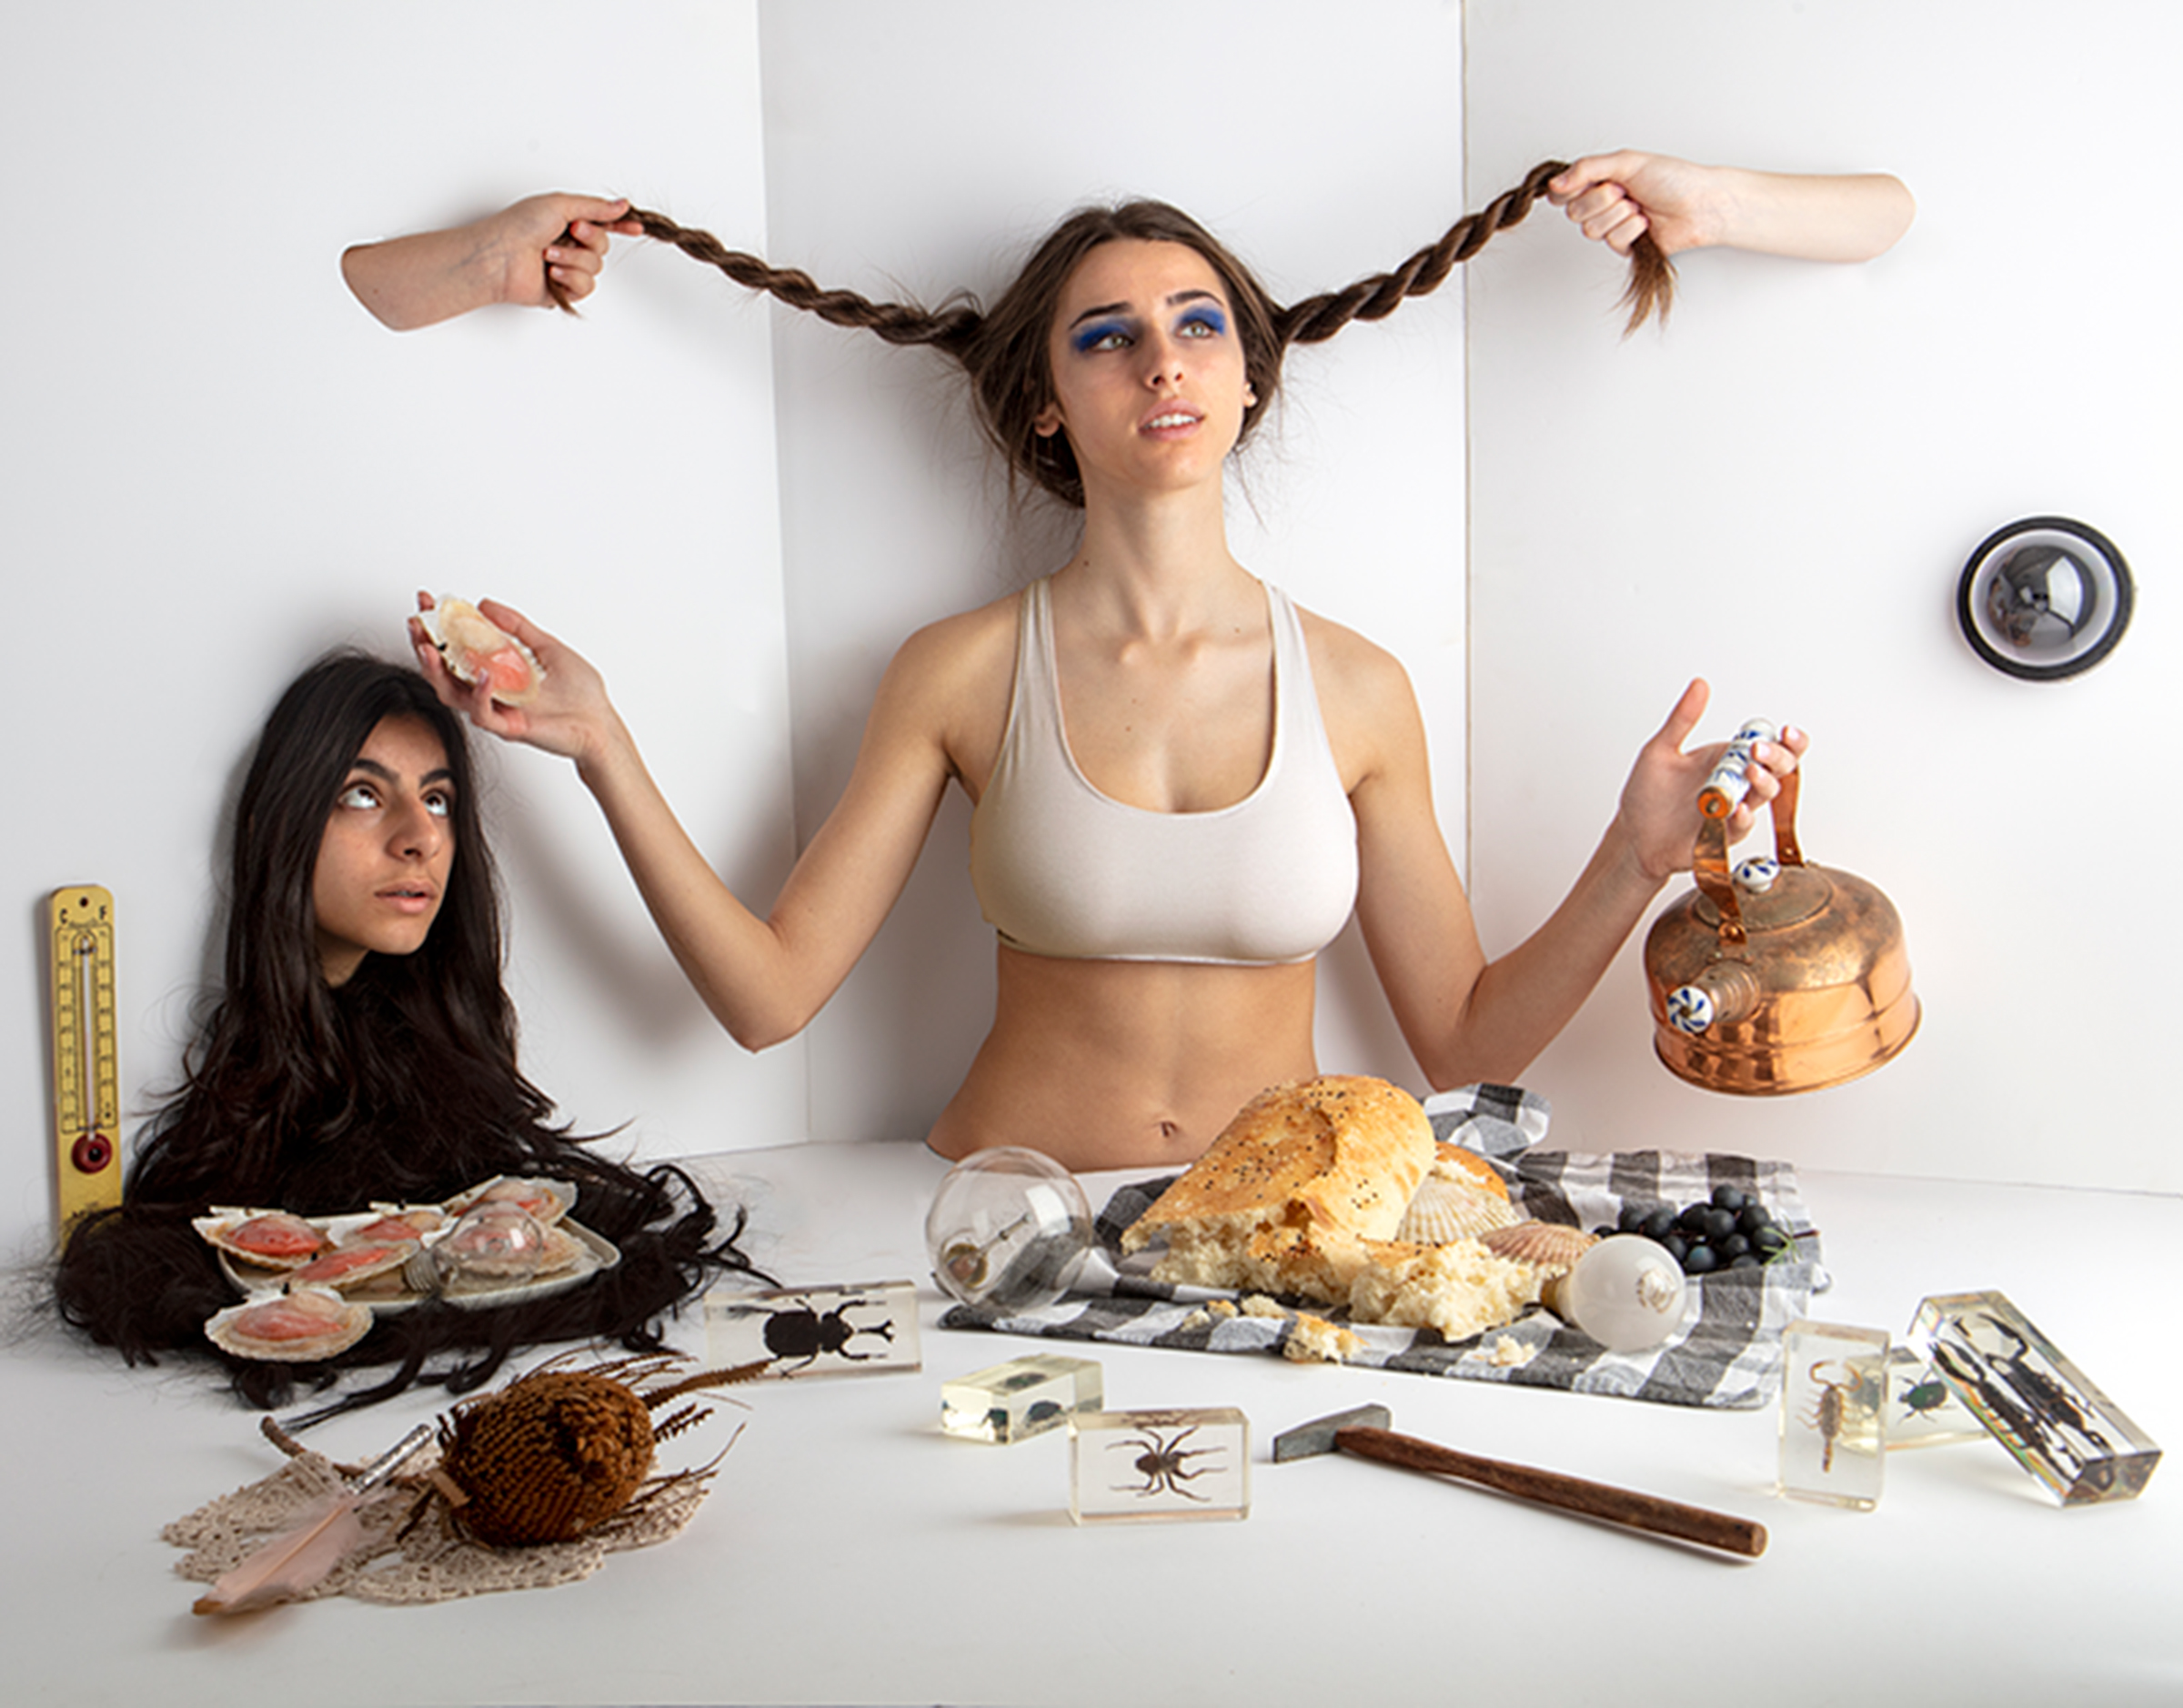 Photograph in a surrealist style, central figure is a girl with pigtails holding a copper kettle, there is another girls face poking through a wall and around them are an assortment of curious objects.